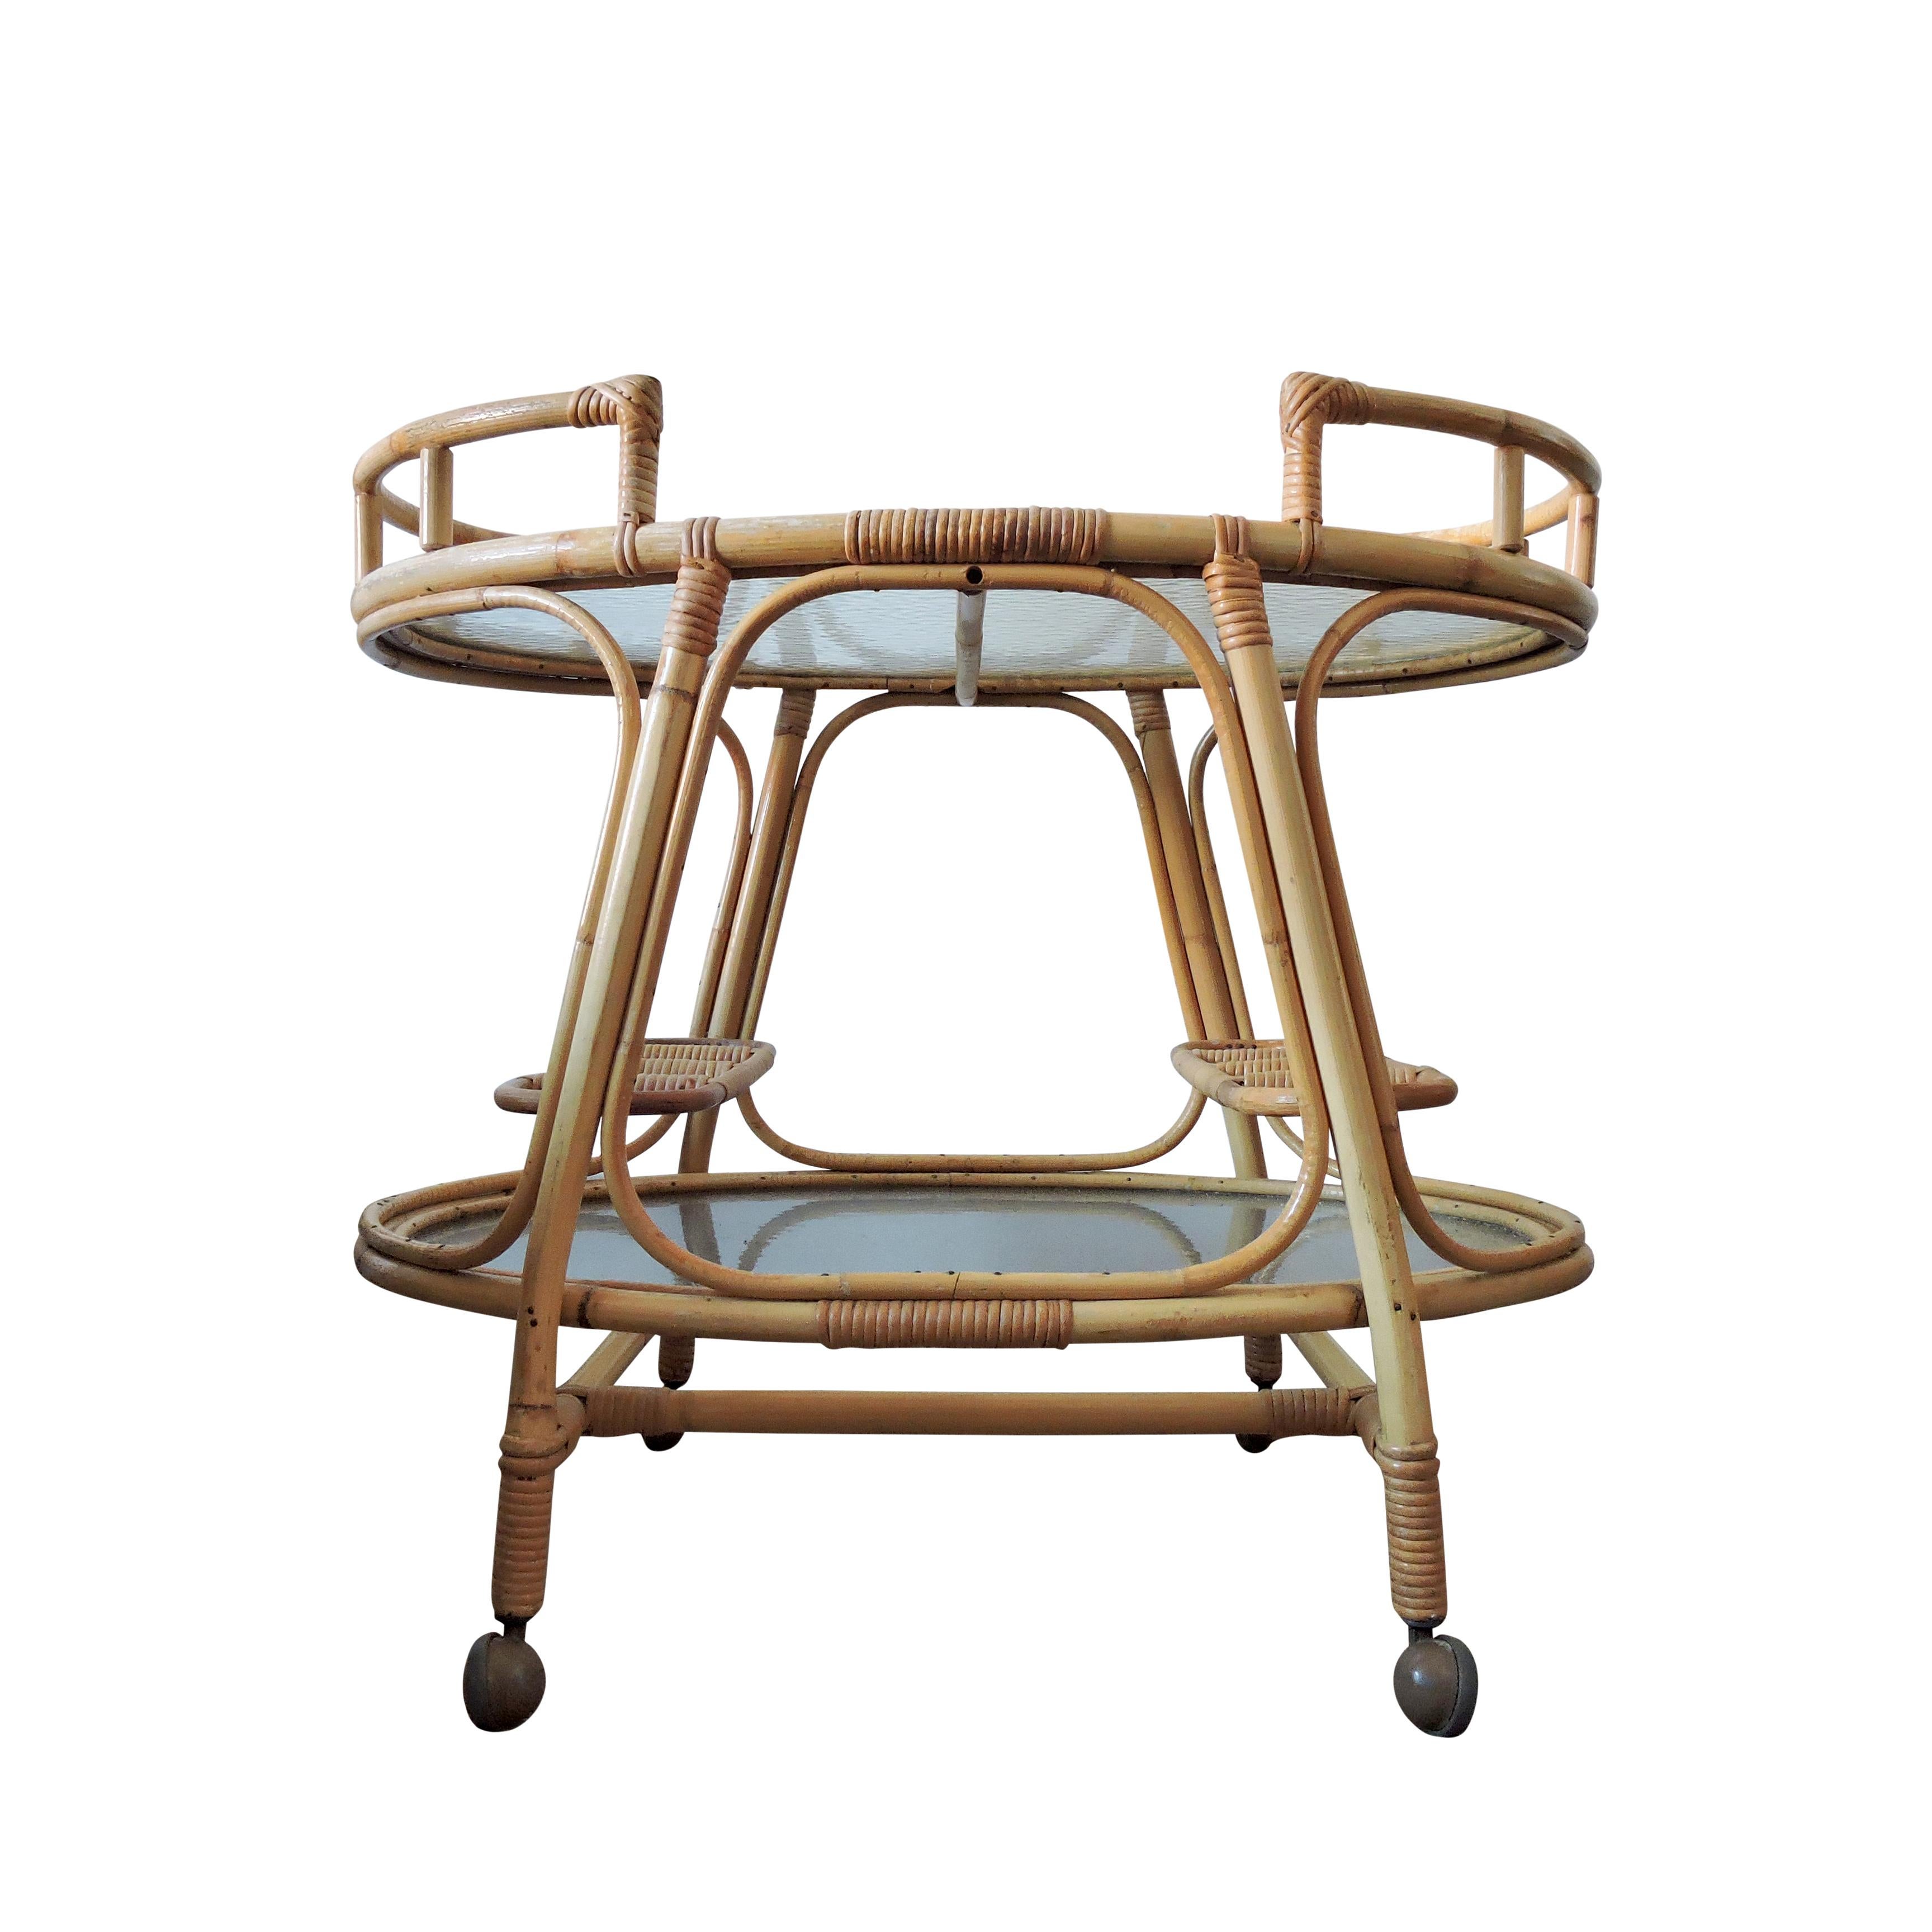 A 1960s oval rattan bamboo drinks trolley with industrial glass shelves and two integrated bottle holders on lower shelf.
        